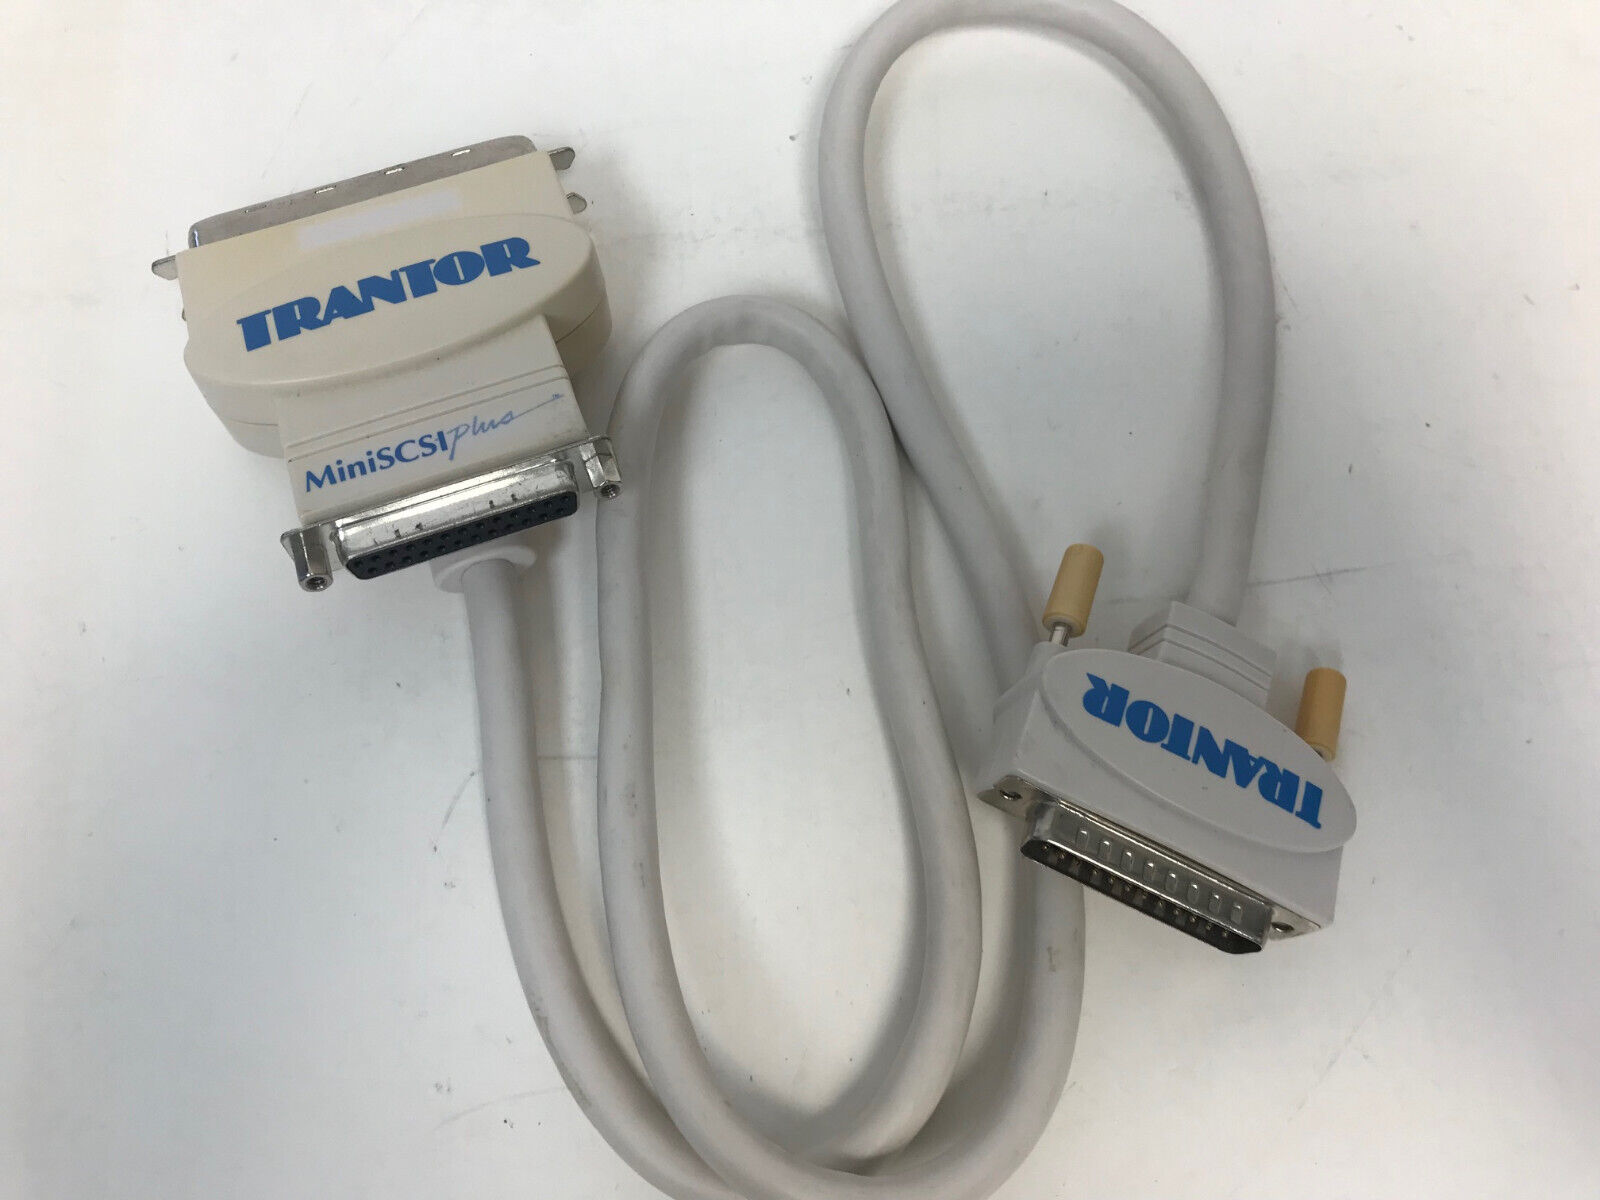 TRANTOR T348 MINISCSI PLUS CABLE WITH WARRANTY